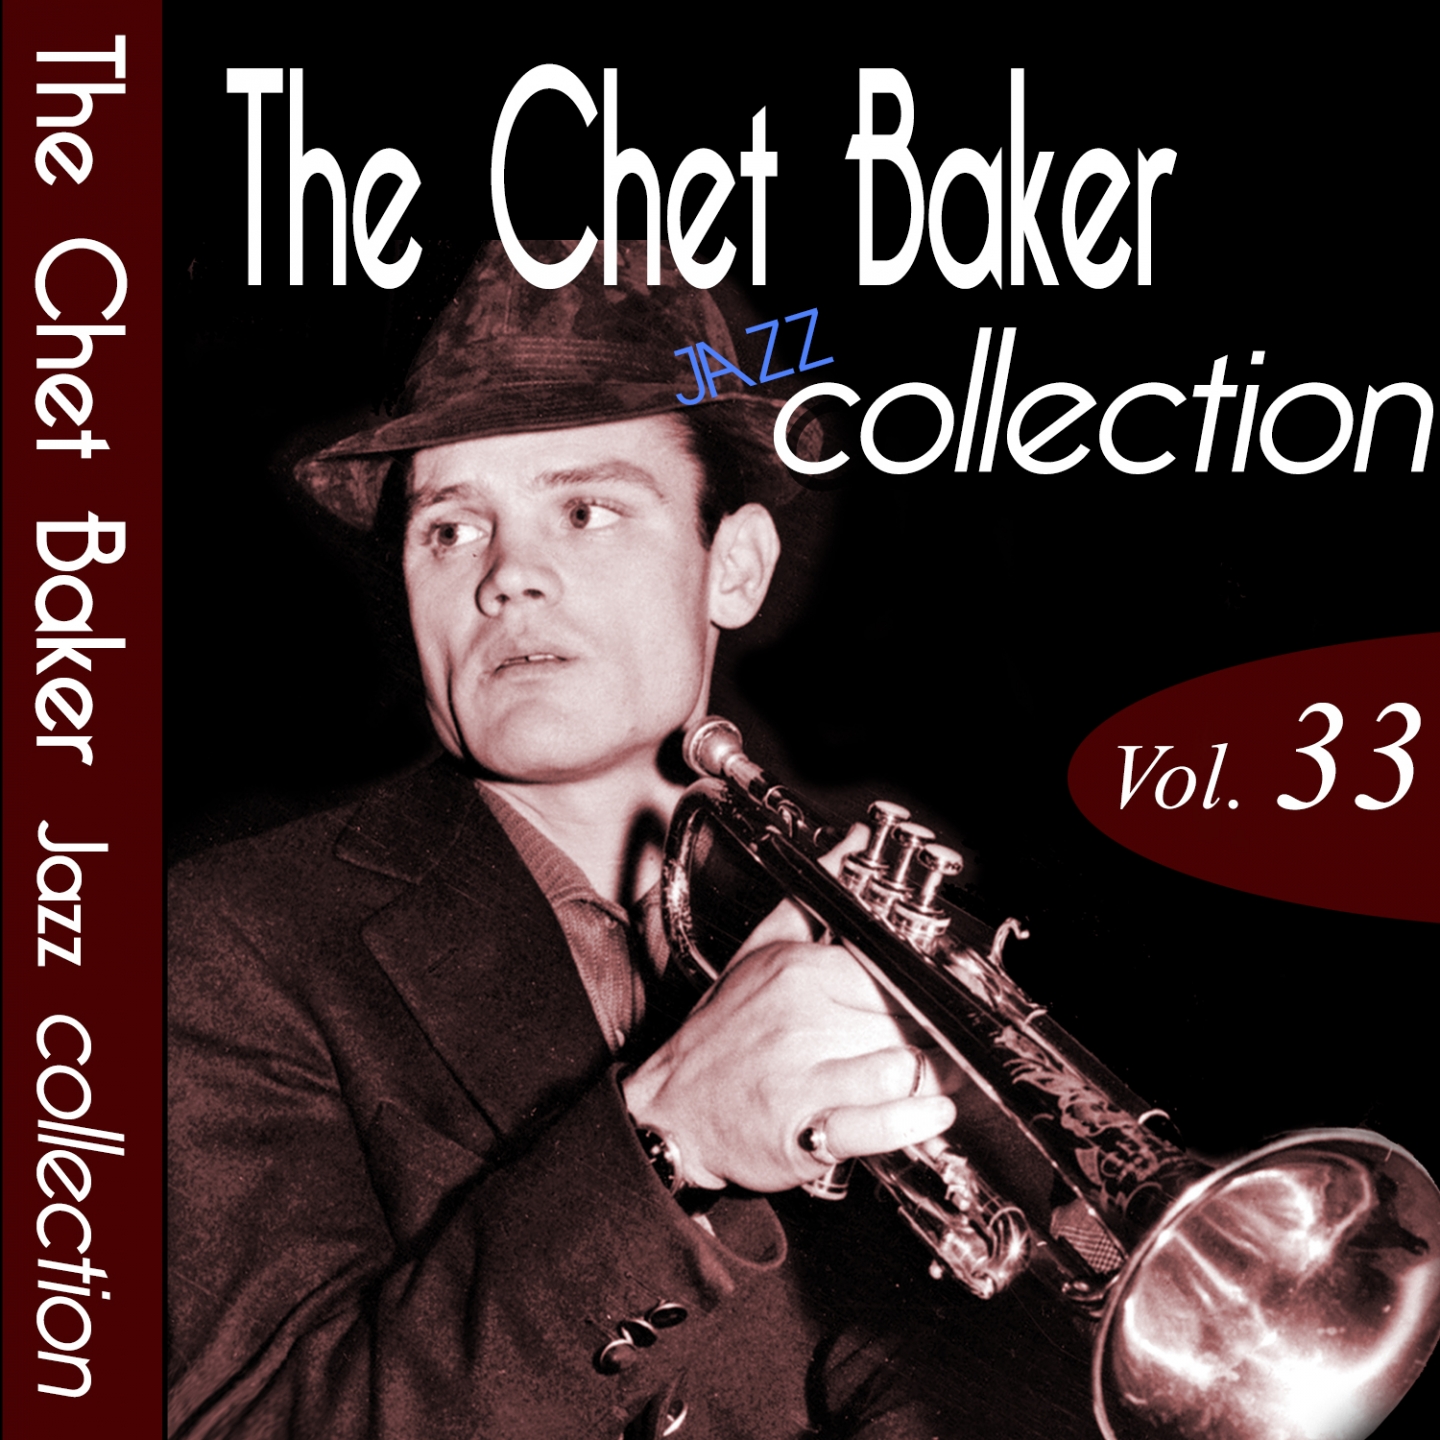 The Chet Baker Jazz Collection, Vol. 33 (Remastered)